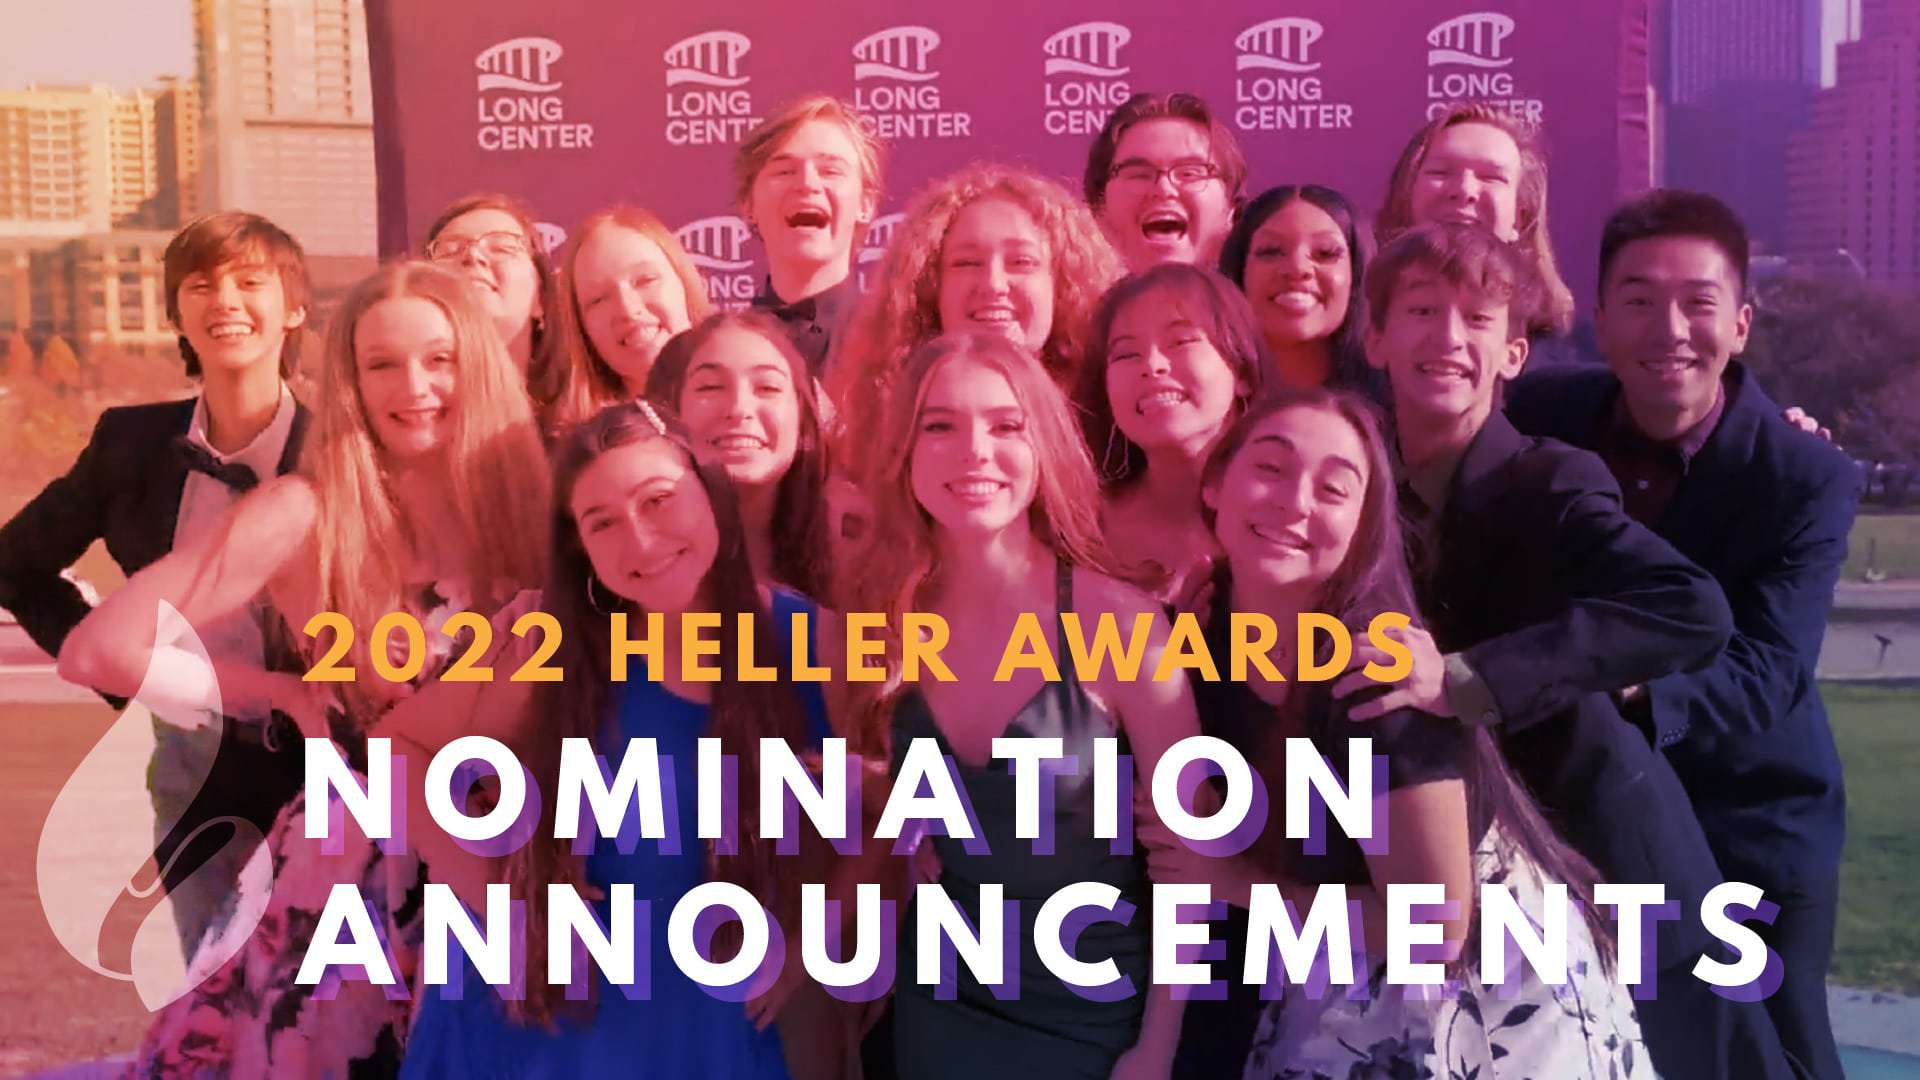 Back in Business Heller Awards Nominations are This Sunday Long Center